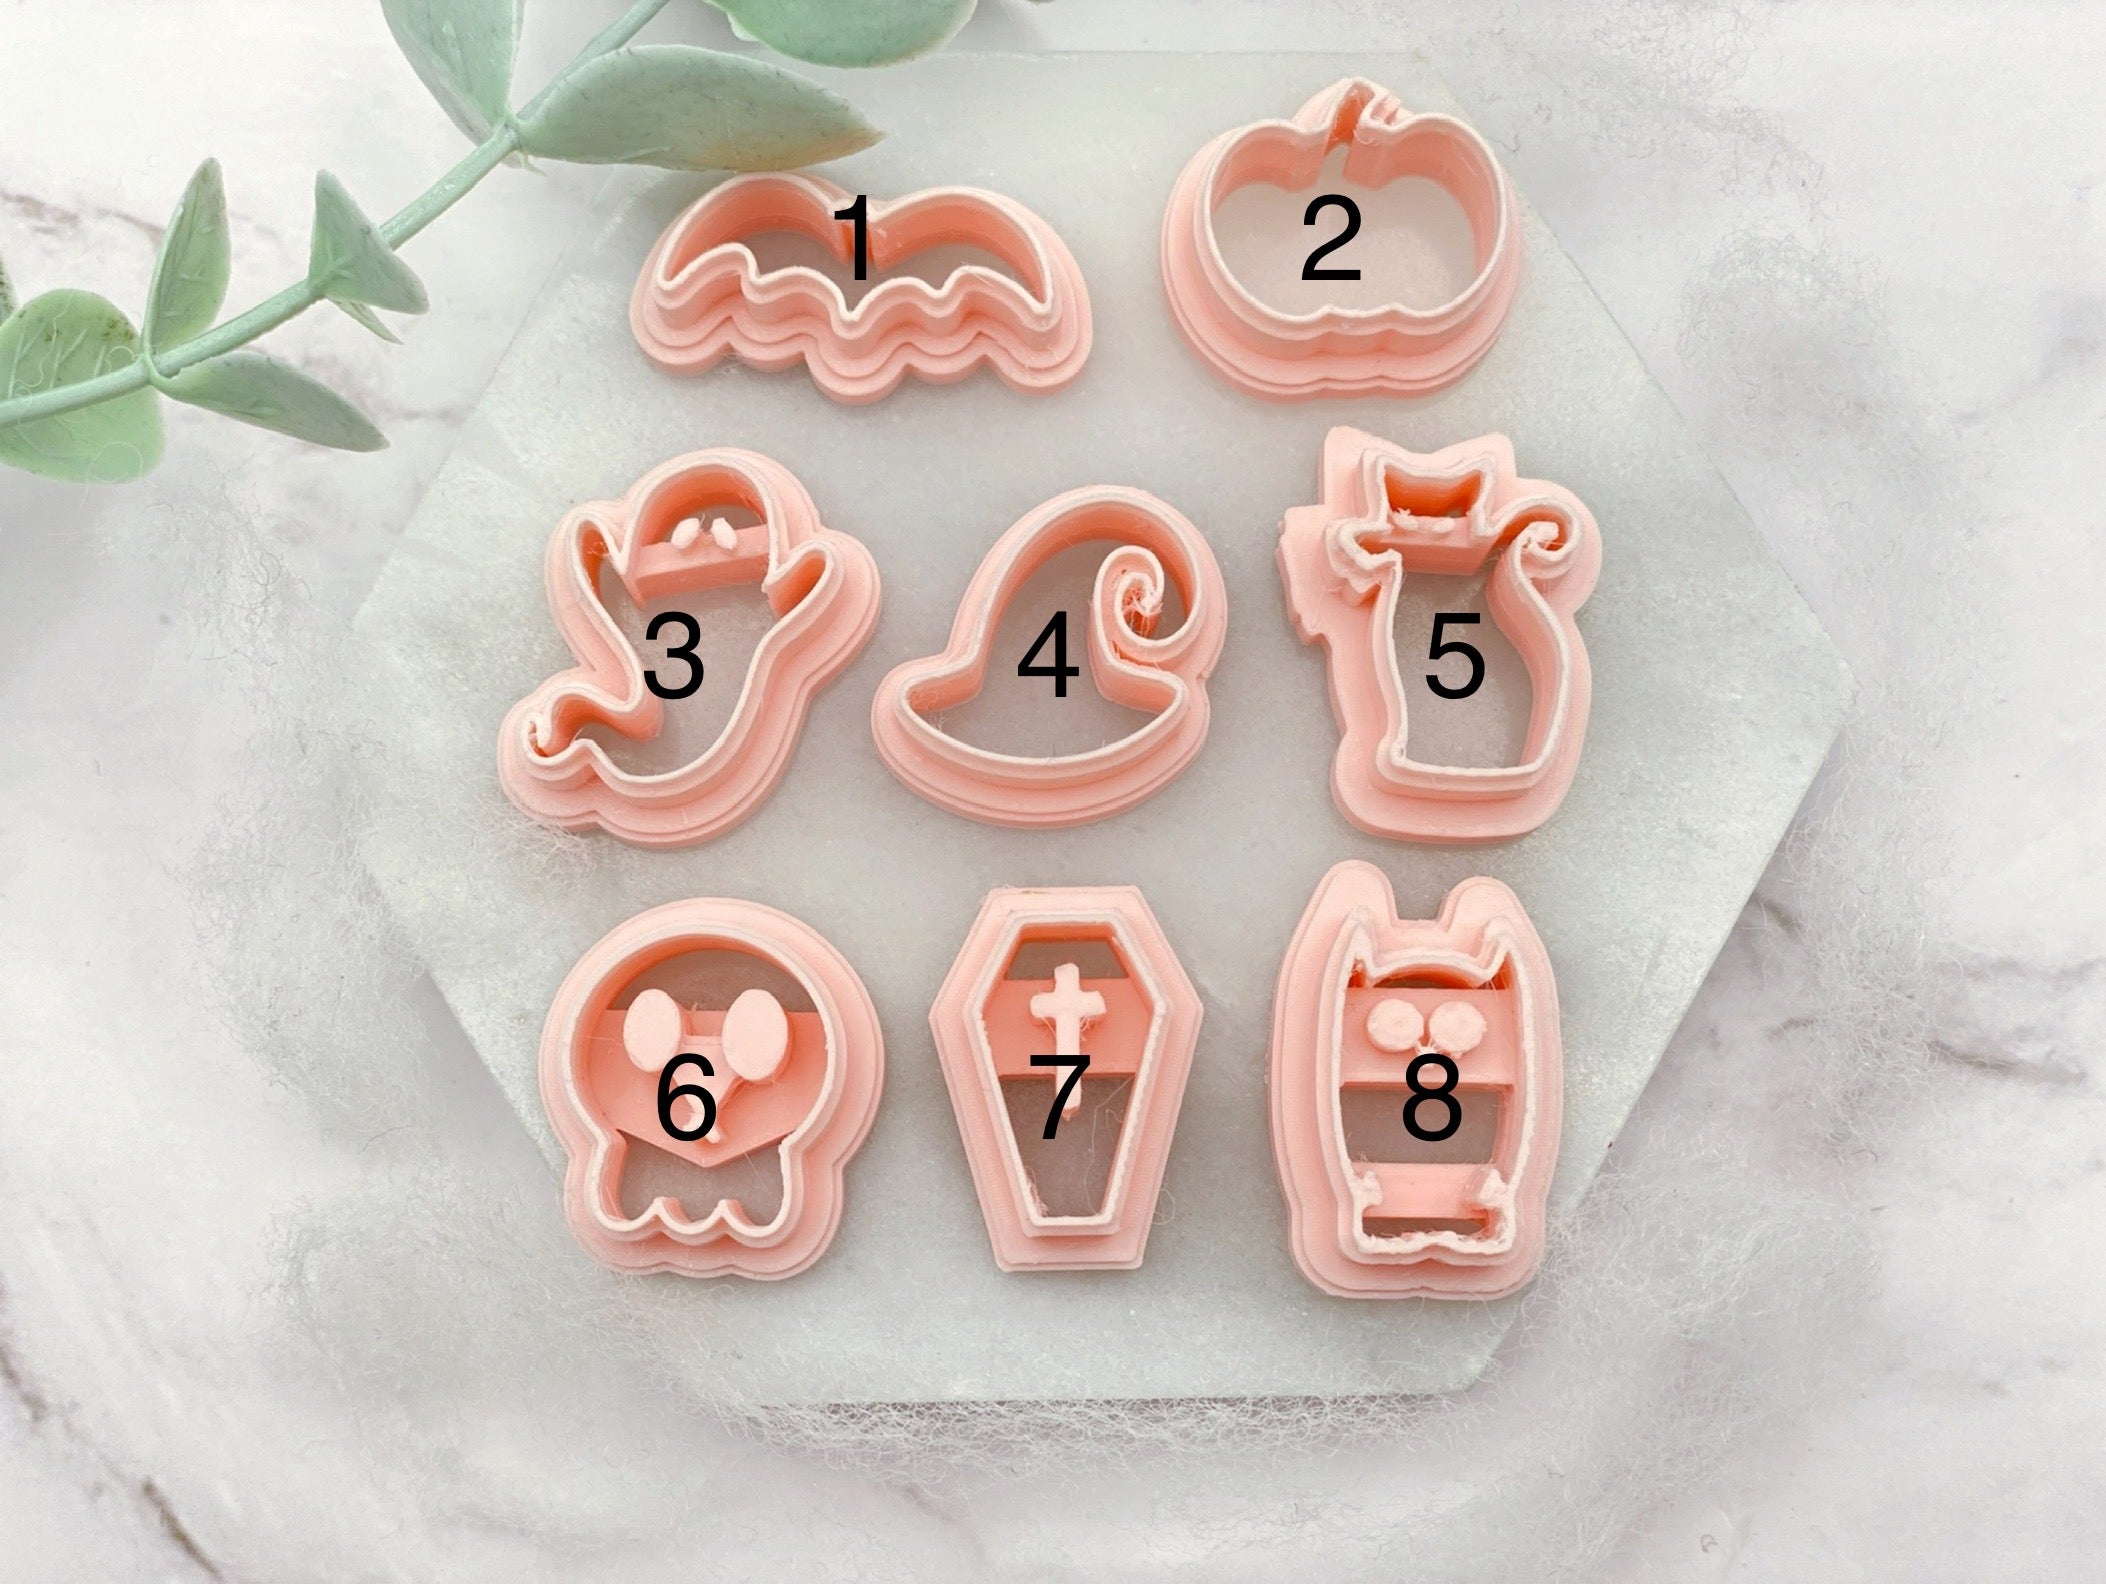  Polymer Clay Cutters Halloween, Clay Cutters for Halloween  Earrings Making, 10 Shapes Halloween Clay Earrings Cutters, Ghost Halloween  Clay Earring Cutters : Arts, Crafts & Sewing